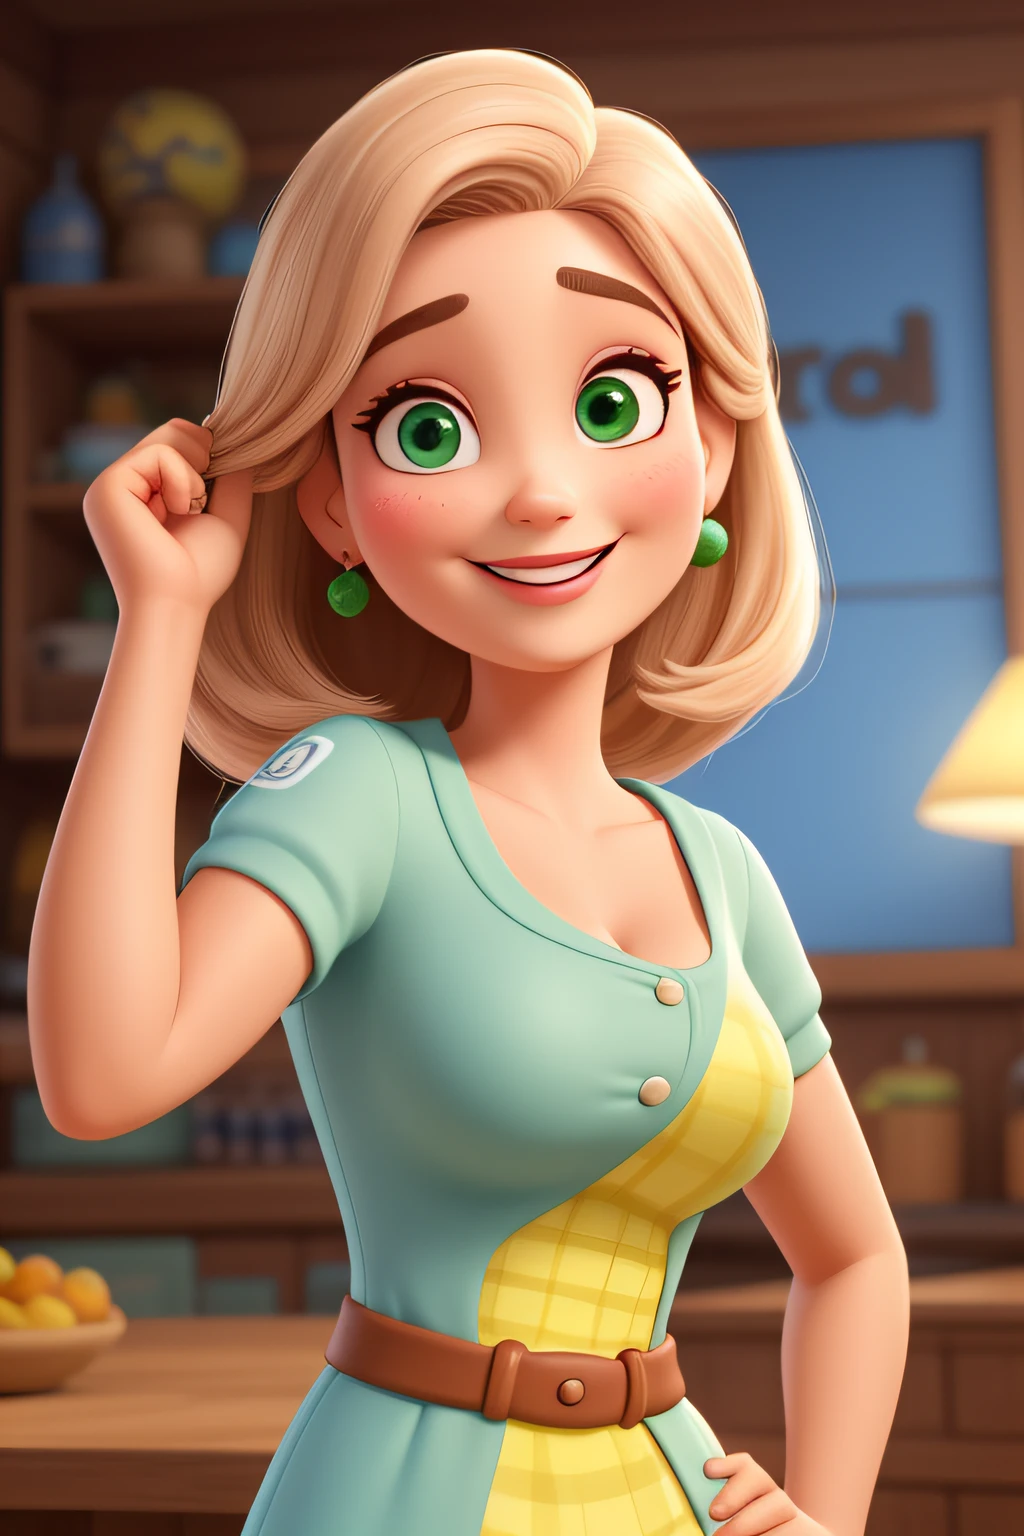 A 40 year old woman, ESTILO DINEY PIXAR, high qualiy, best qualityer, with blond hair, Round face, round face with charming smile, and green eyes